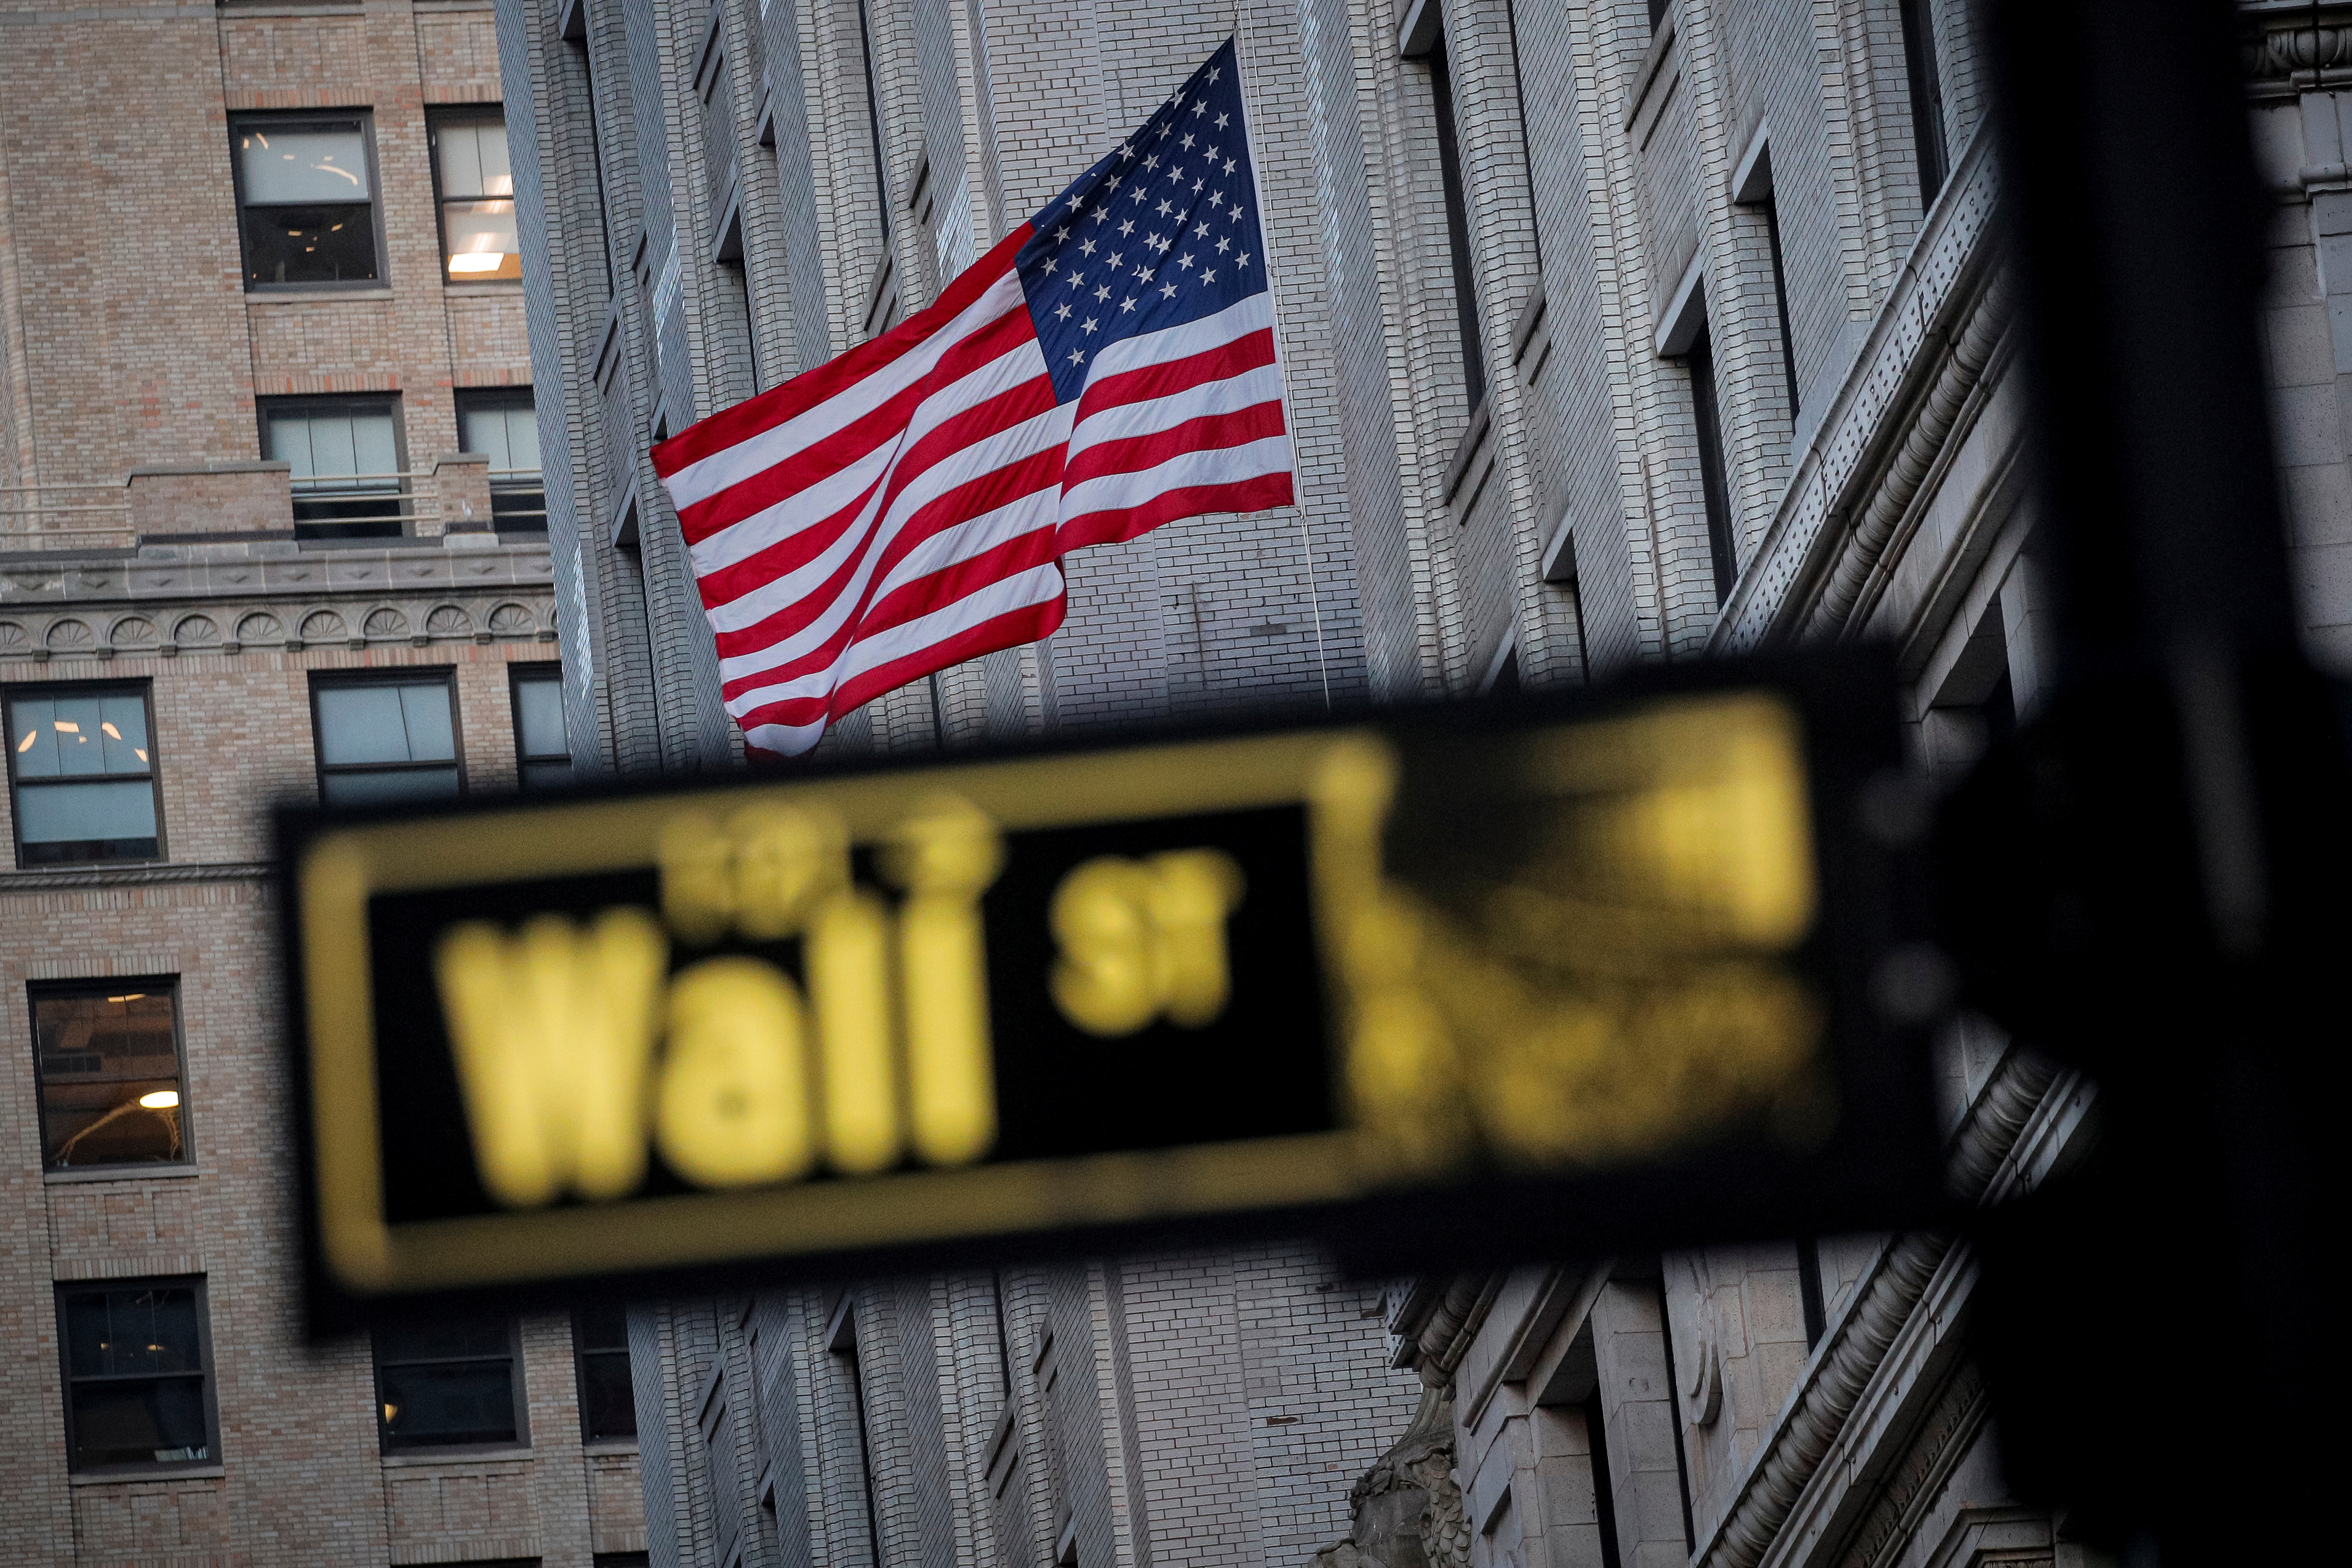 wall street sign can be seen in front of a US flag